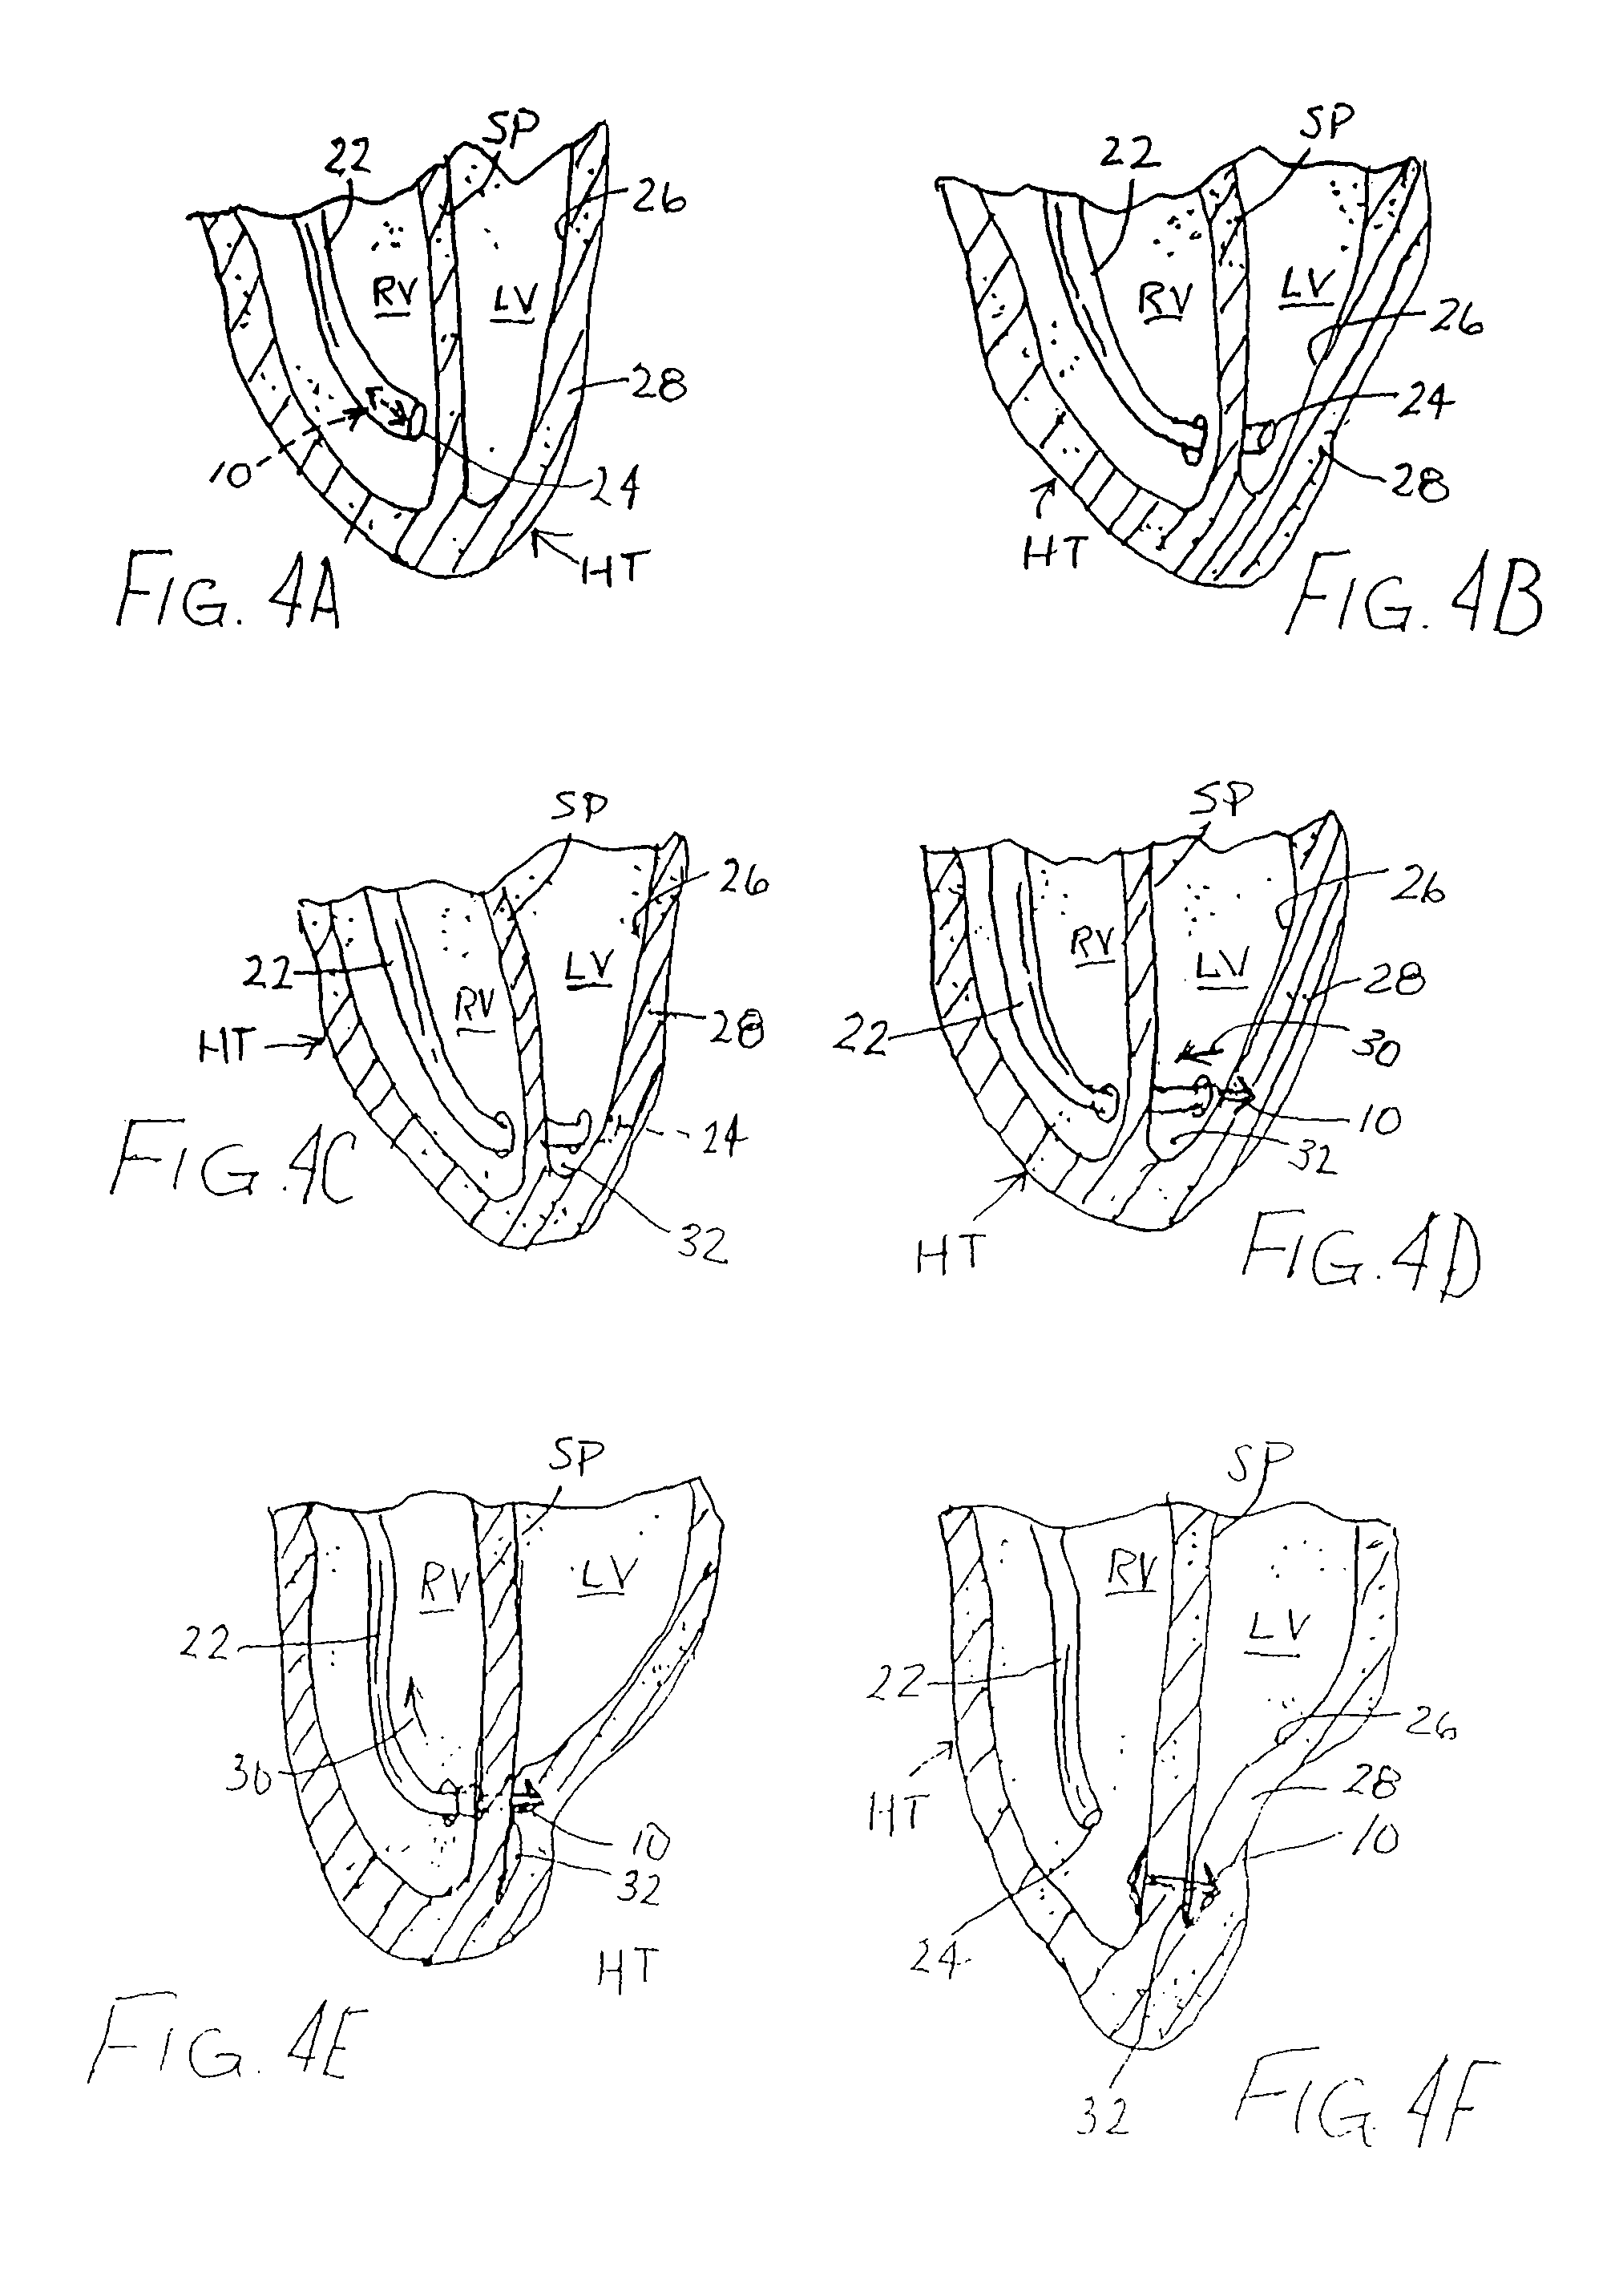 Method and device for improving cardiac function